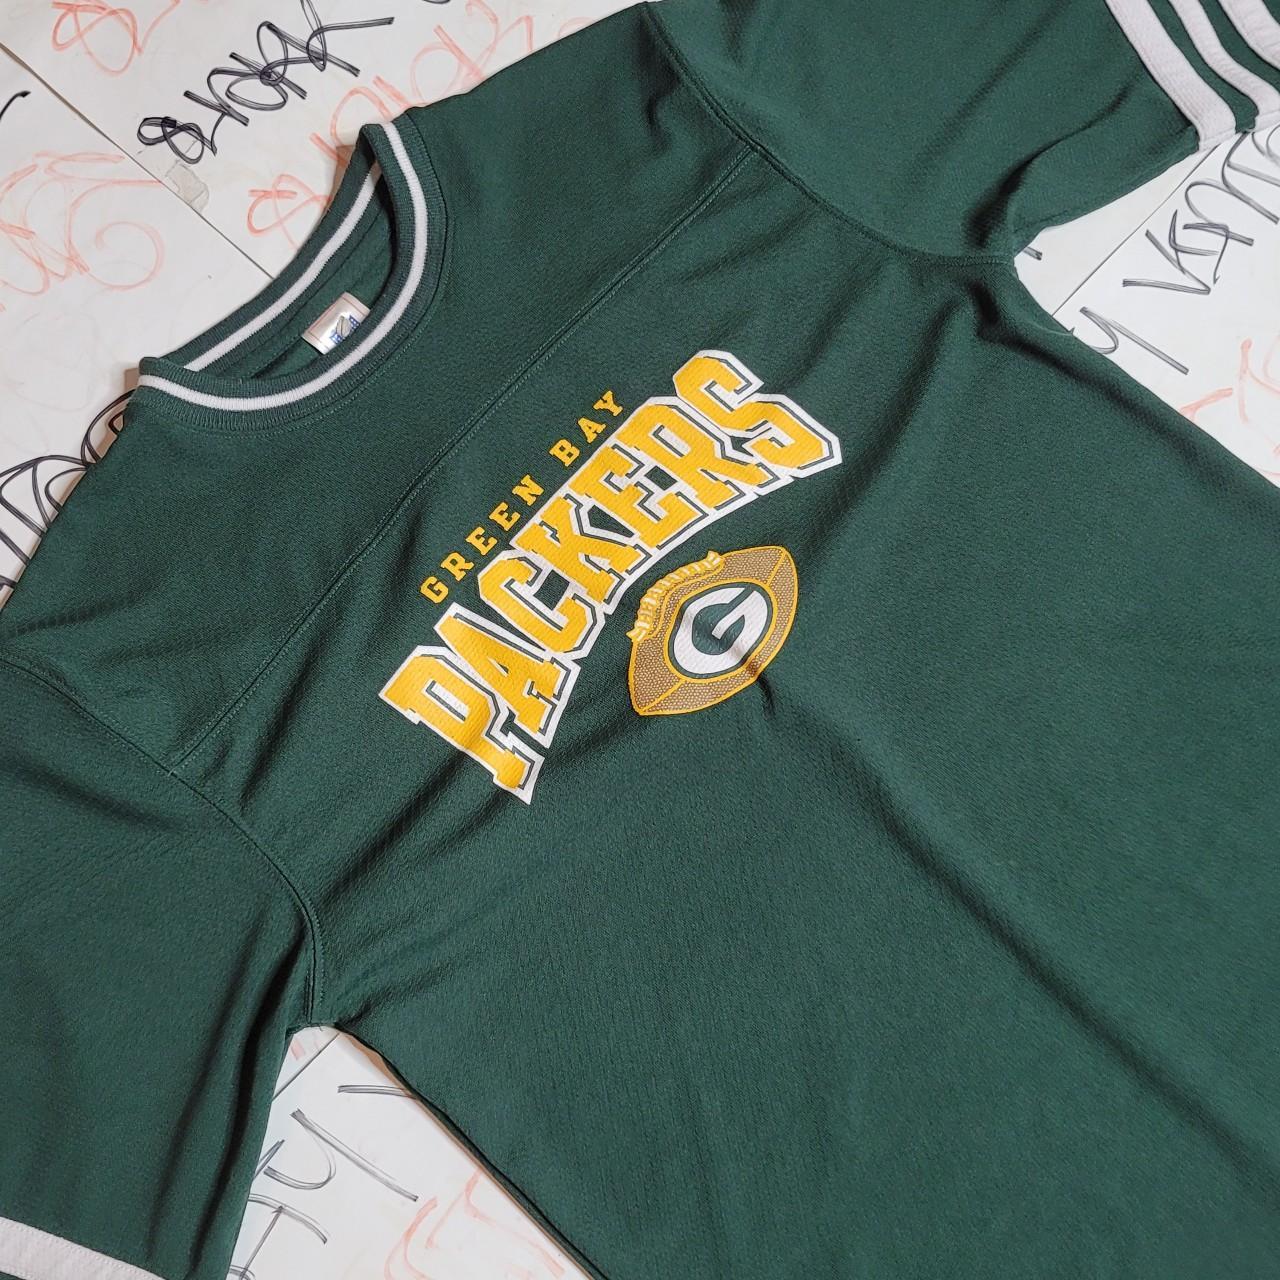 Green Bay Packers Vintage Jersey Shirt SCRIMMAGE Youth Large 14-16 Boys NFL  GB